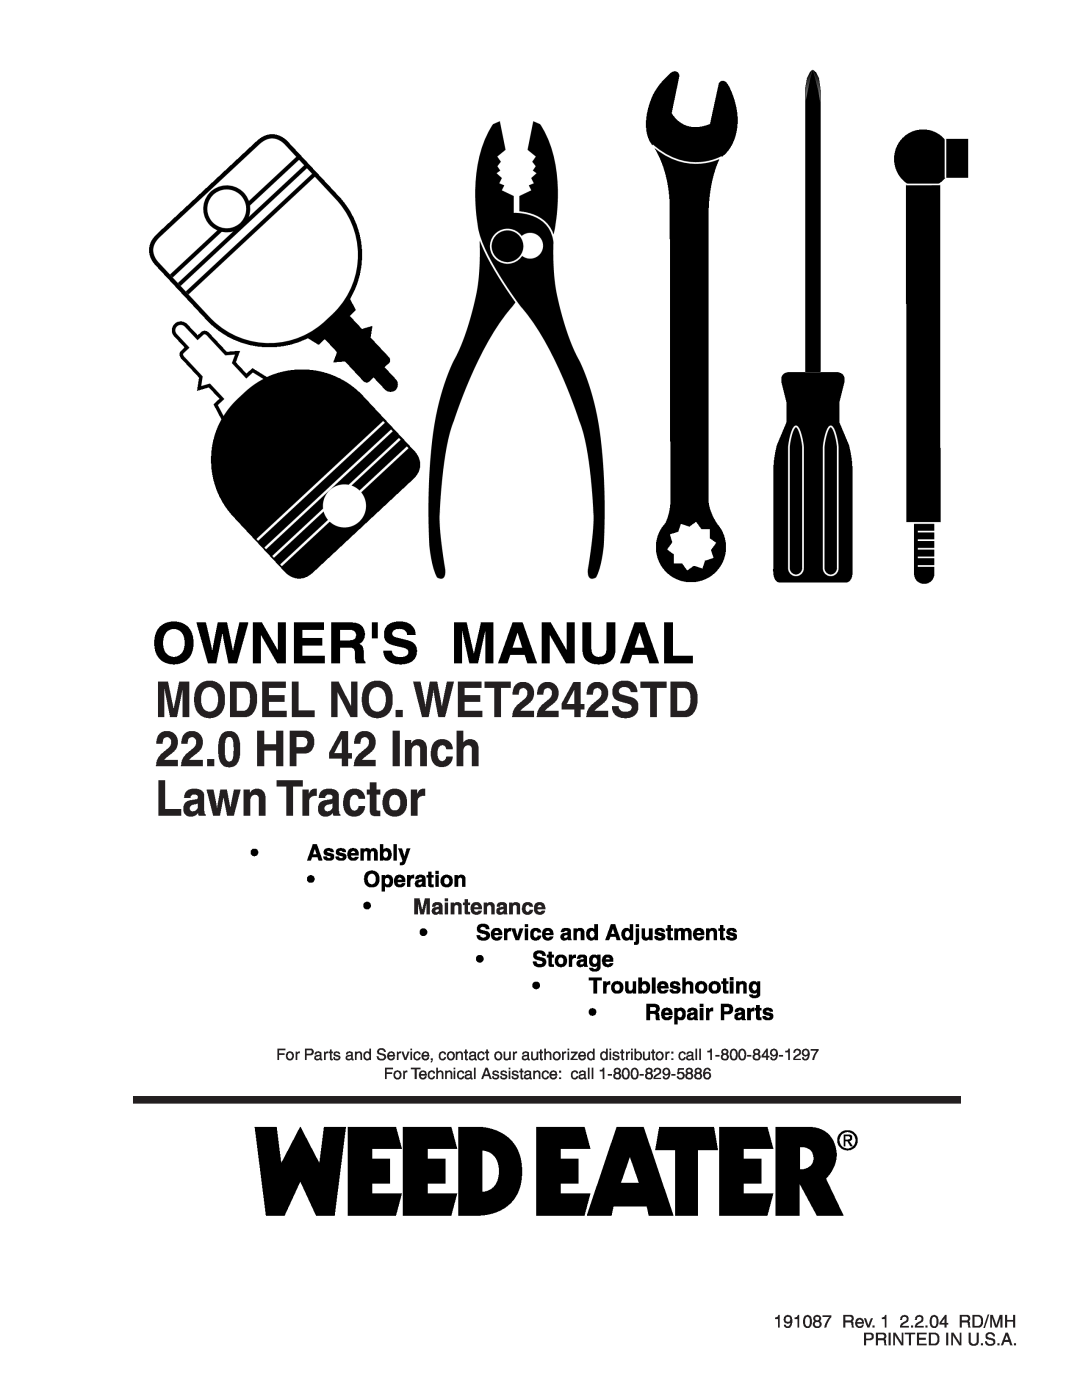 Weed Eater manual MODEL NO. WET2242STD 22.0 HP 42 Inch Lawn Tractor, 191087 Rev. 1 2.2.04 RD/MH PRINTED IN U.S.A 